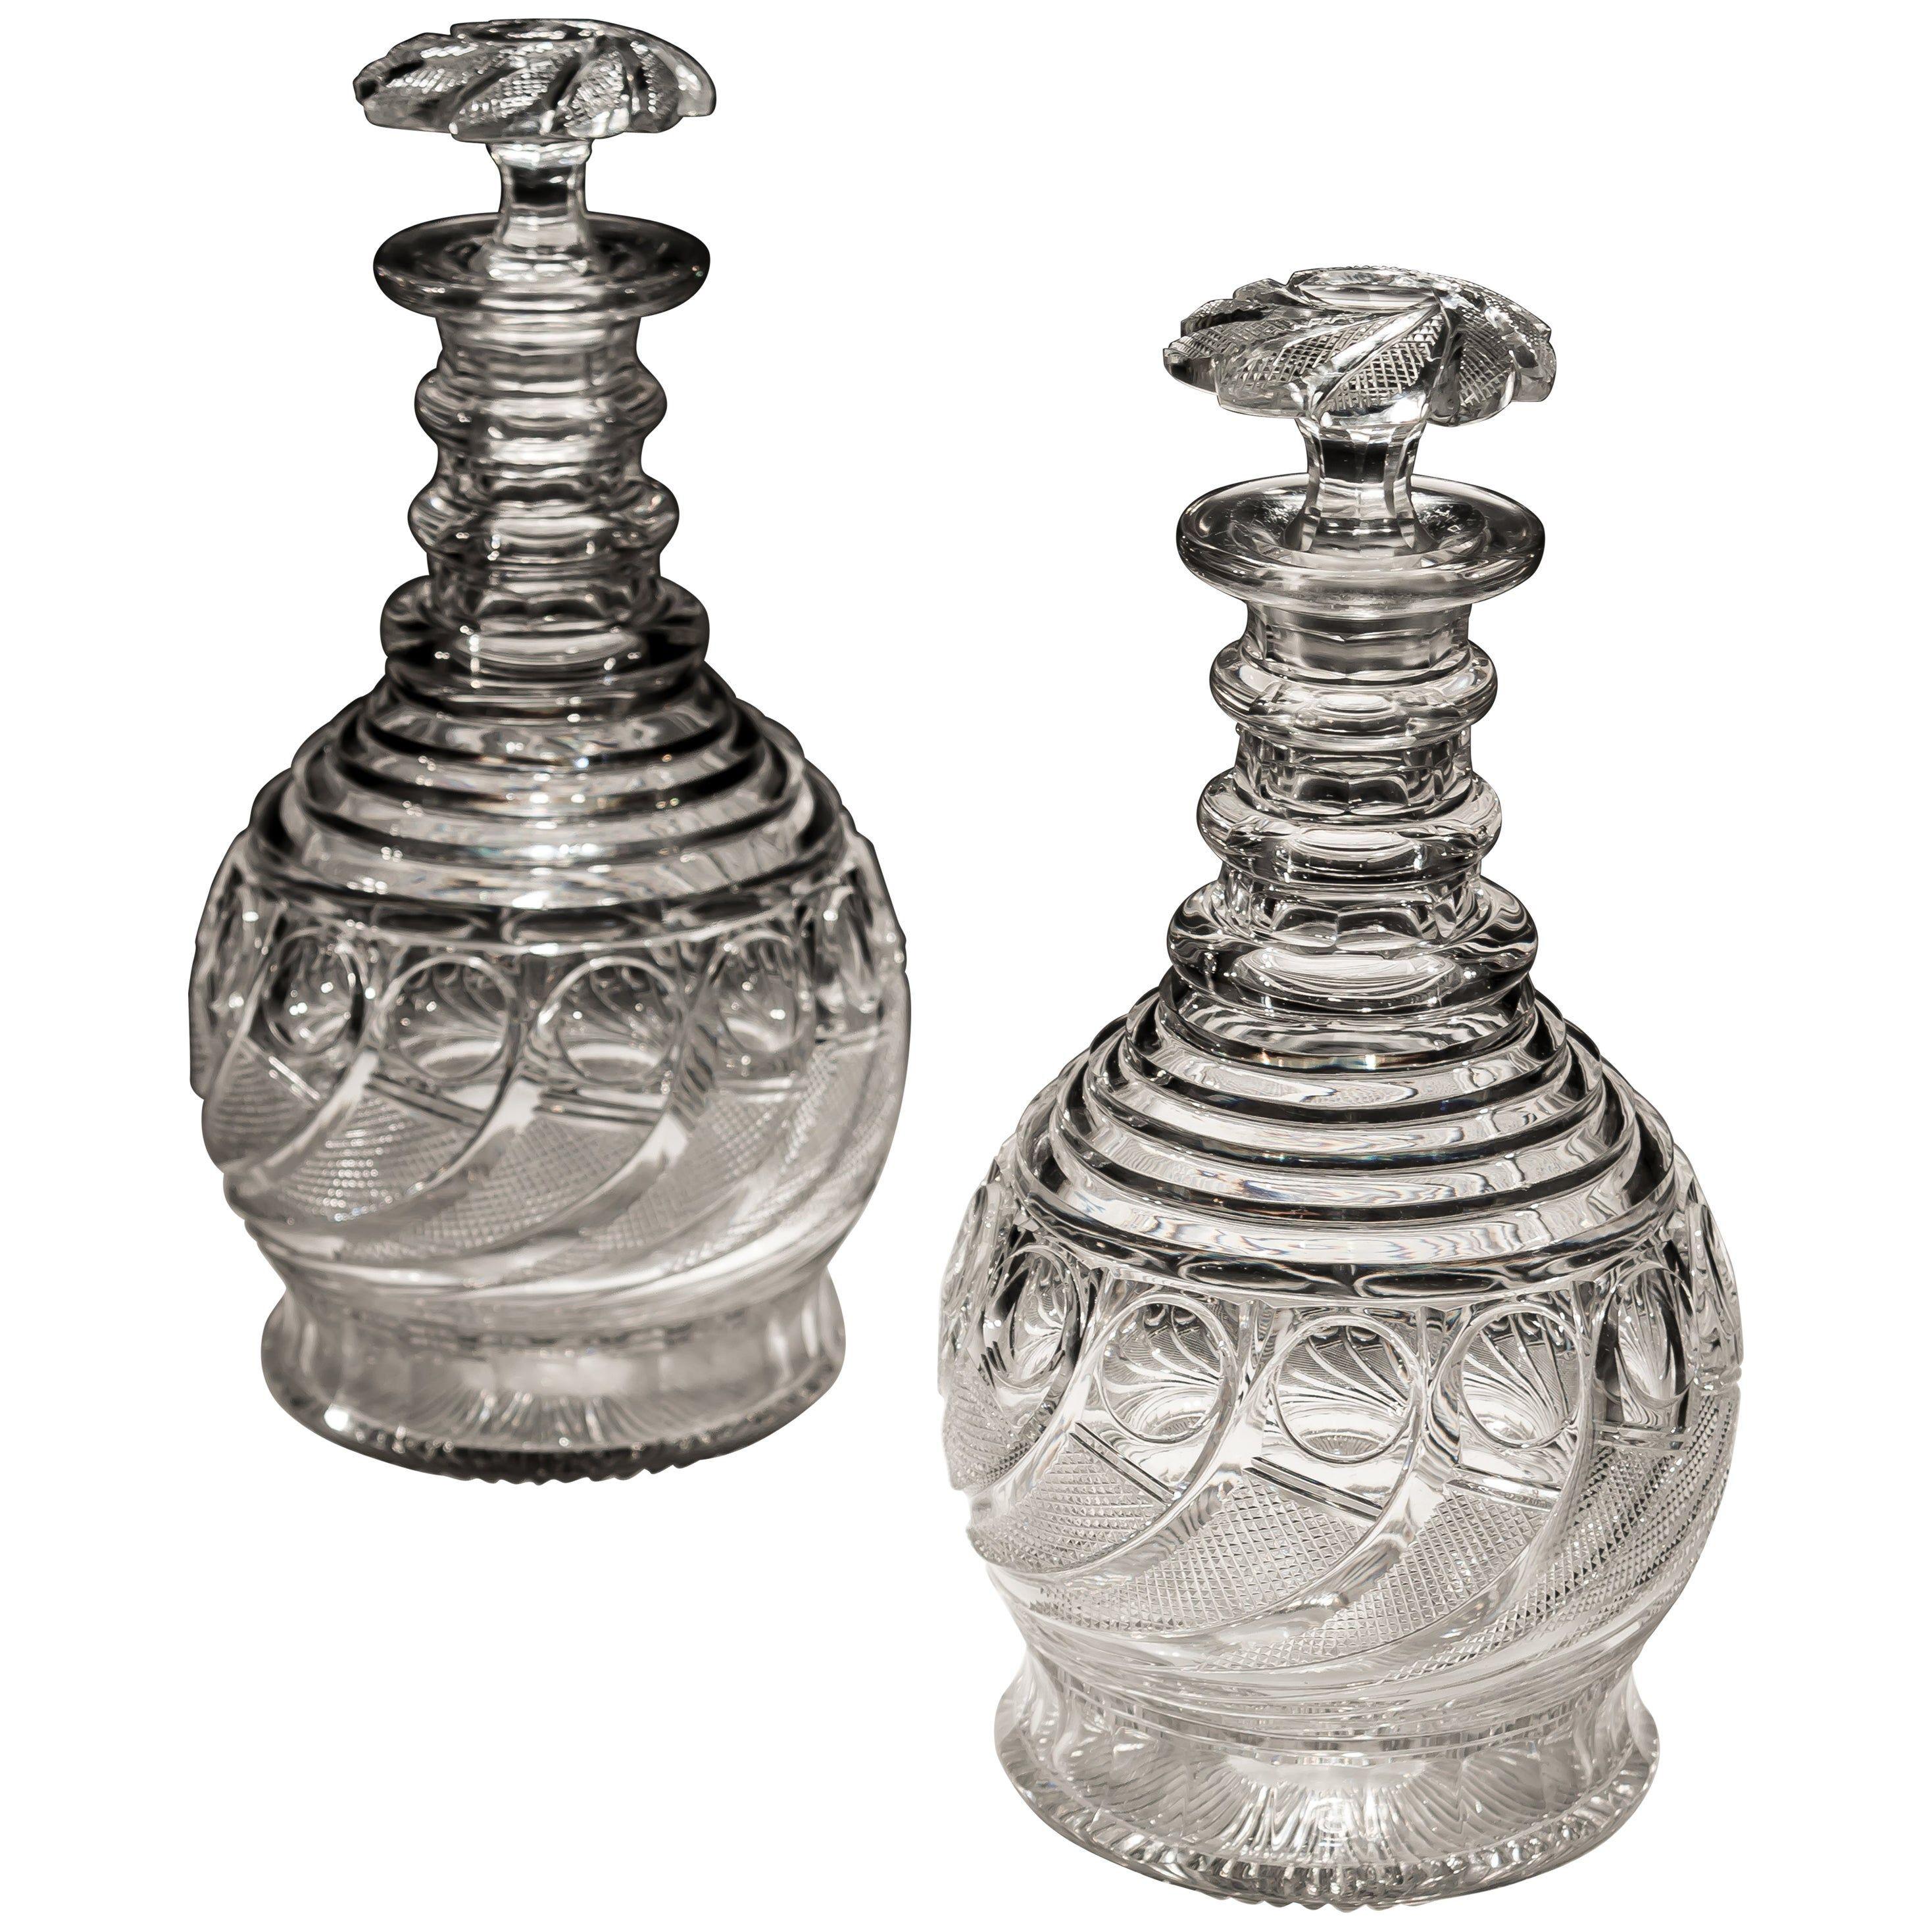 Exceptional Pair of Swirl Cut Regency Decanters with Swirl Cut Stoppers